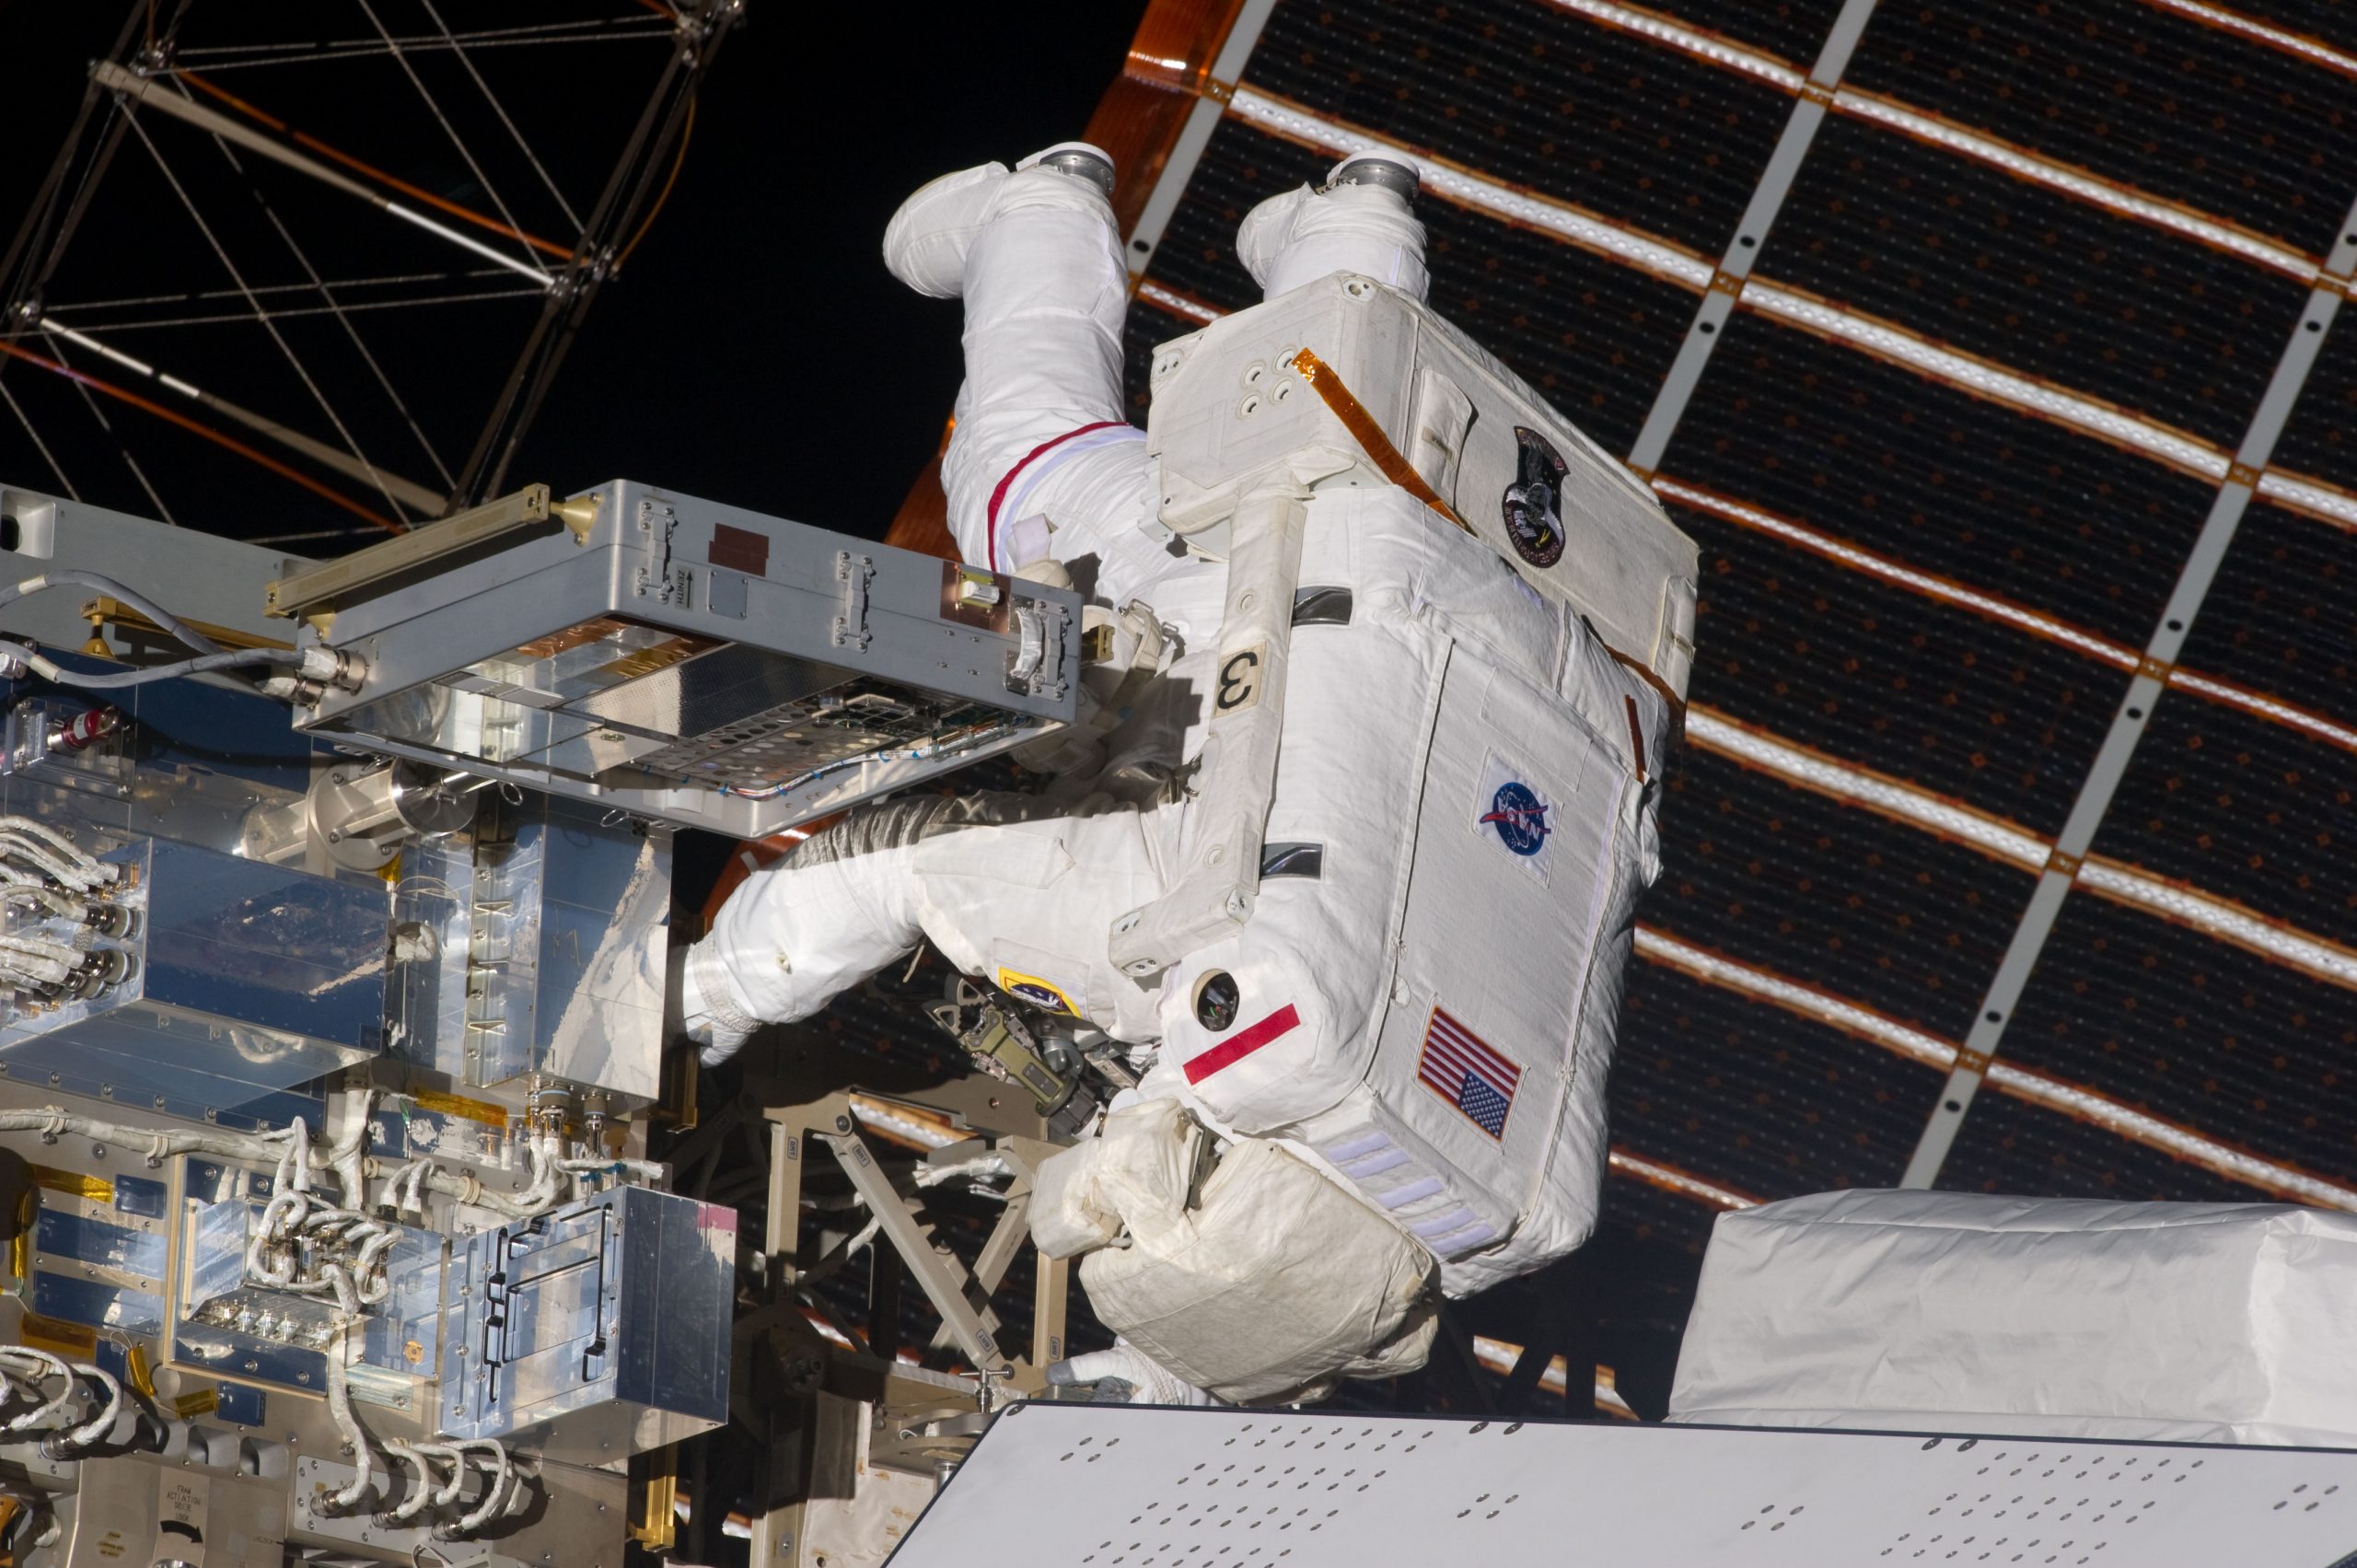 Astronaut installs the MISSE-7 pallet onboard the ISS, which contains a 587 spacecube as part of the payload. The Materials International Space Station Experiment was a joint program between the DoD and NASA to investigate the suitability of different materials and technologies in space.